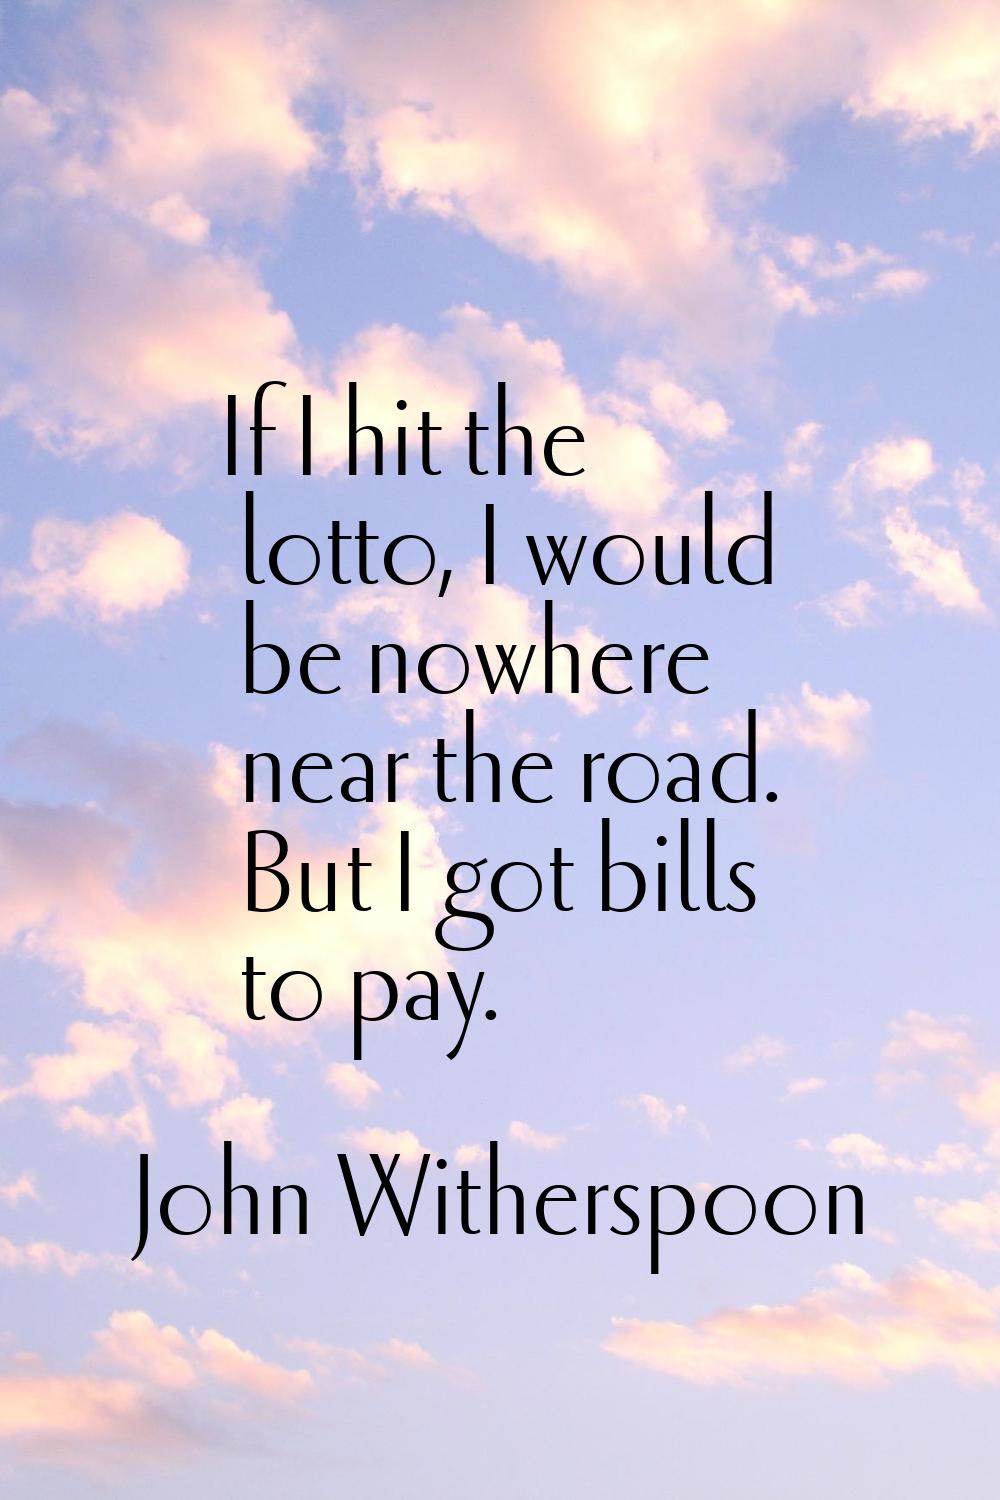 If I hit the lotto, I would be nowhere near the road. But I got bills to pay.